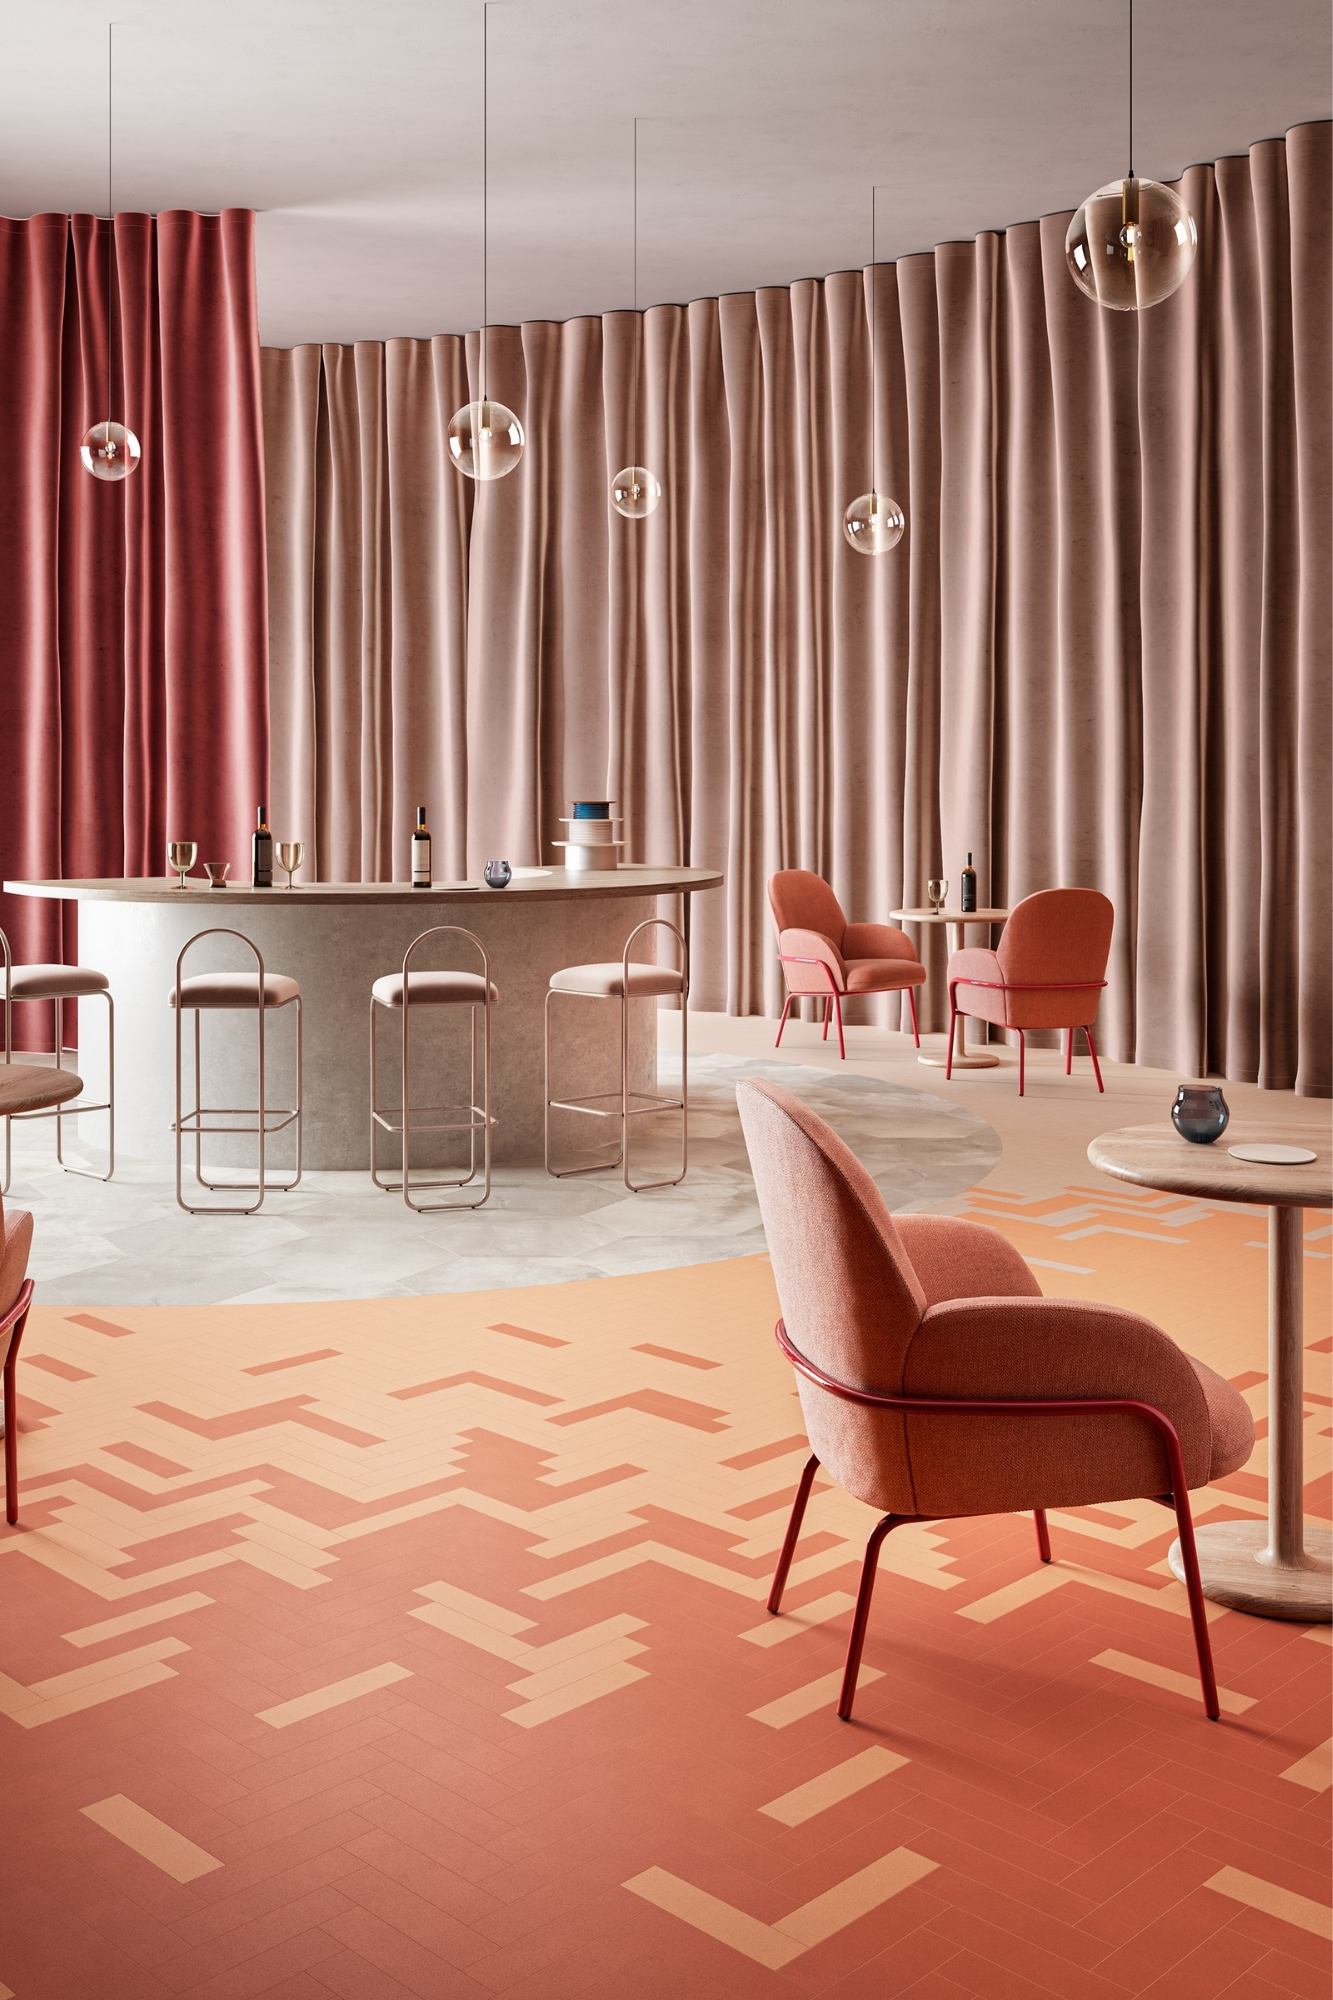 flooring designs, Customisable Flooring Helps Create a Unique and Personal Design